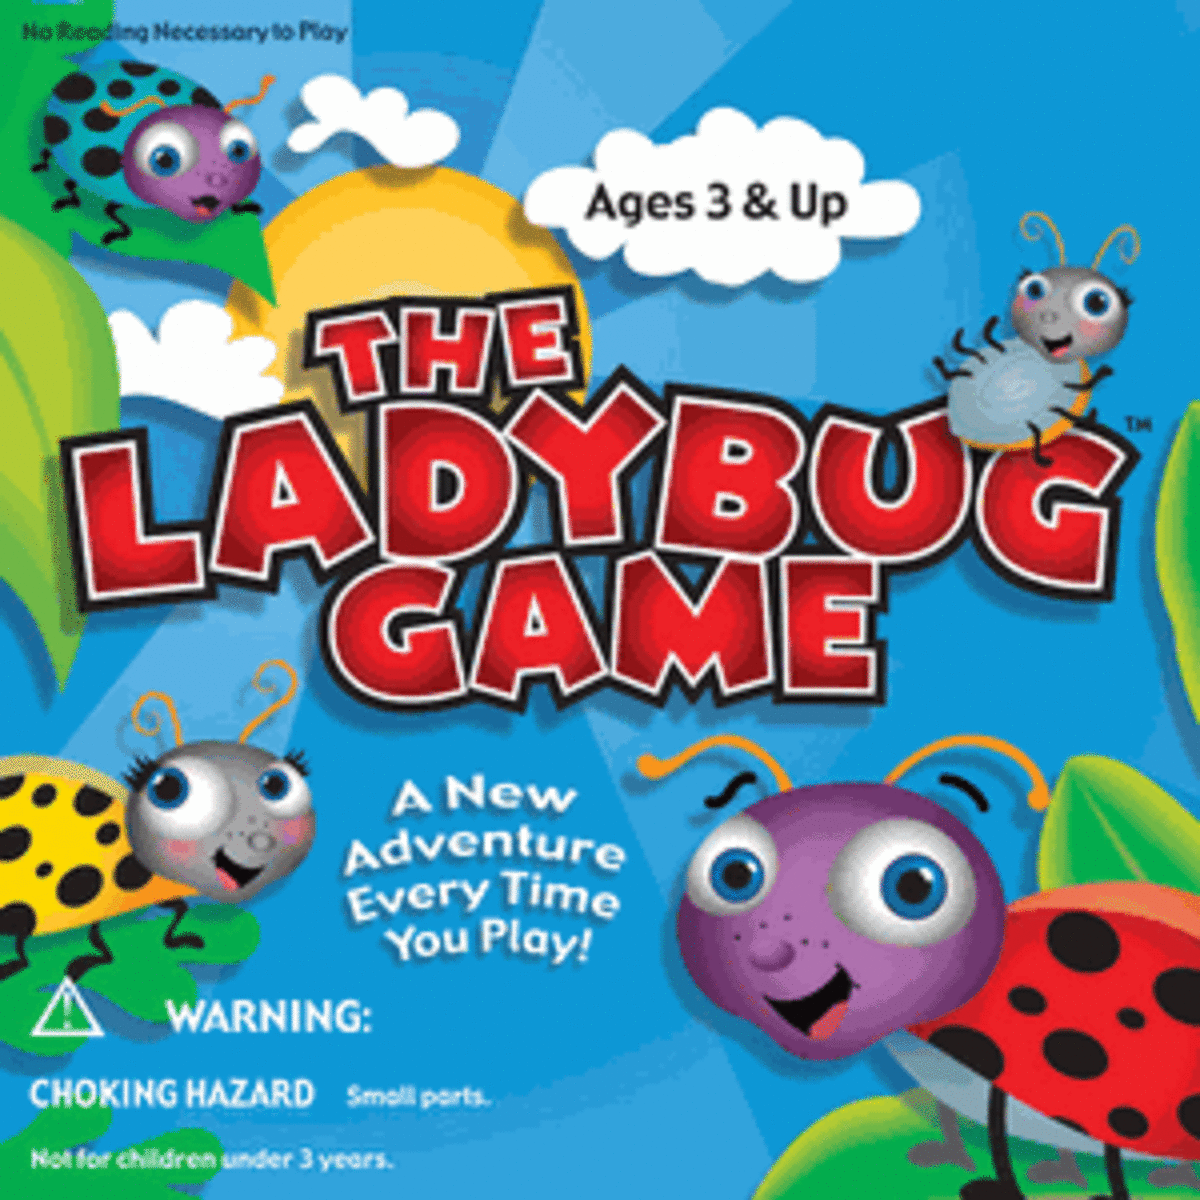 The Ladybug Game: Preschool Board Game Review